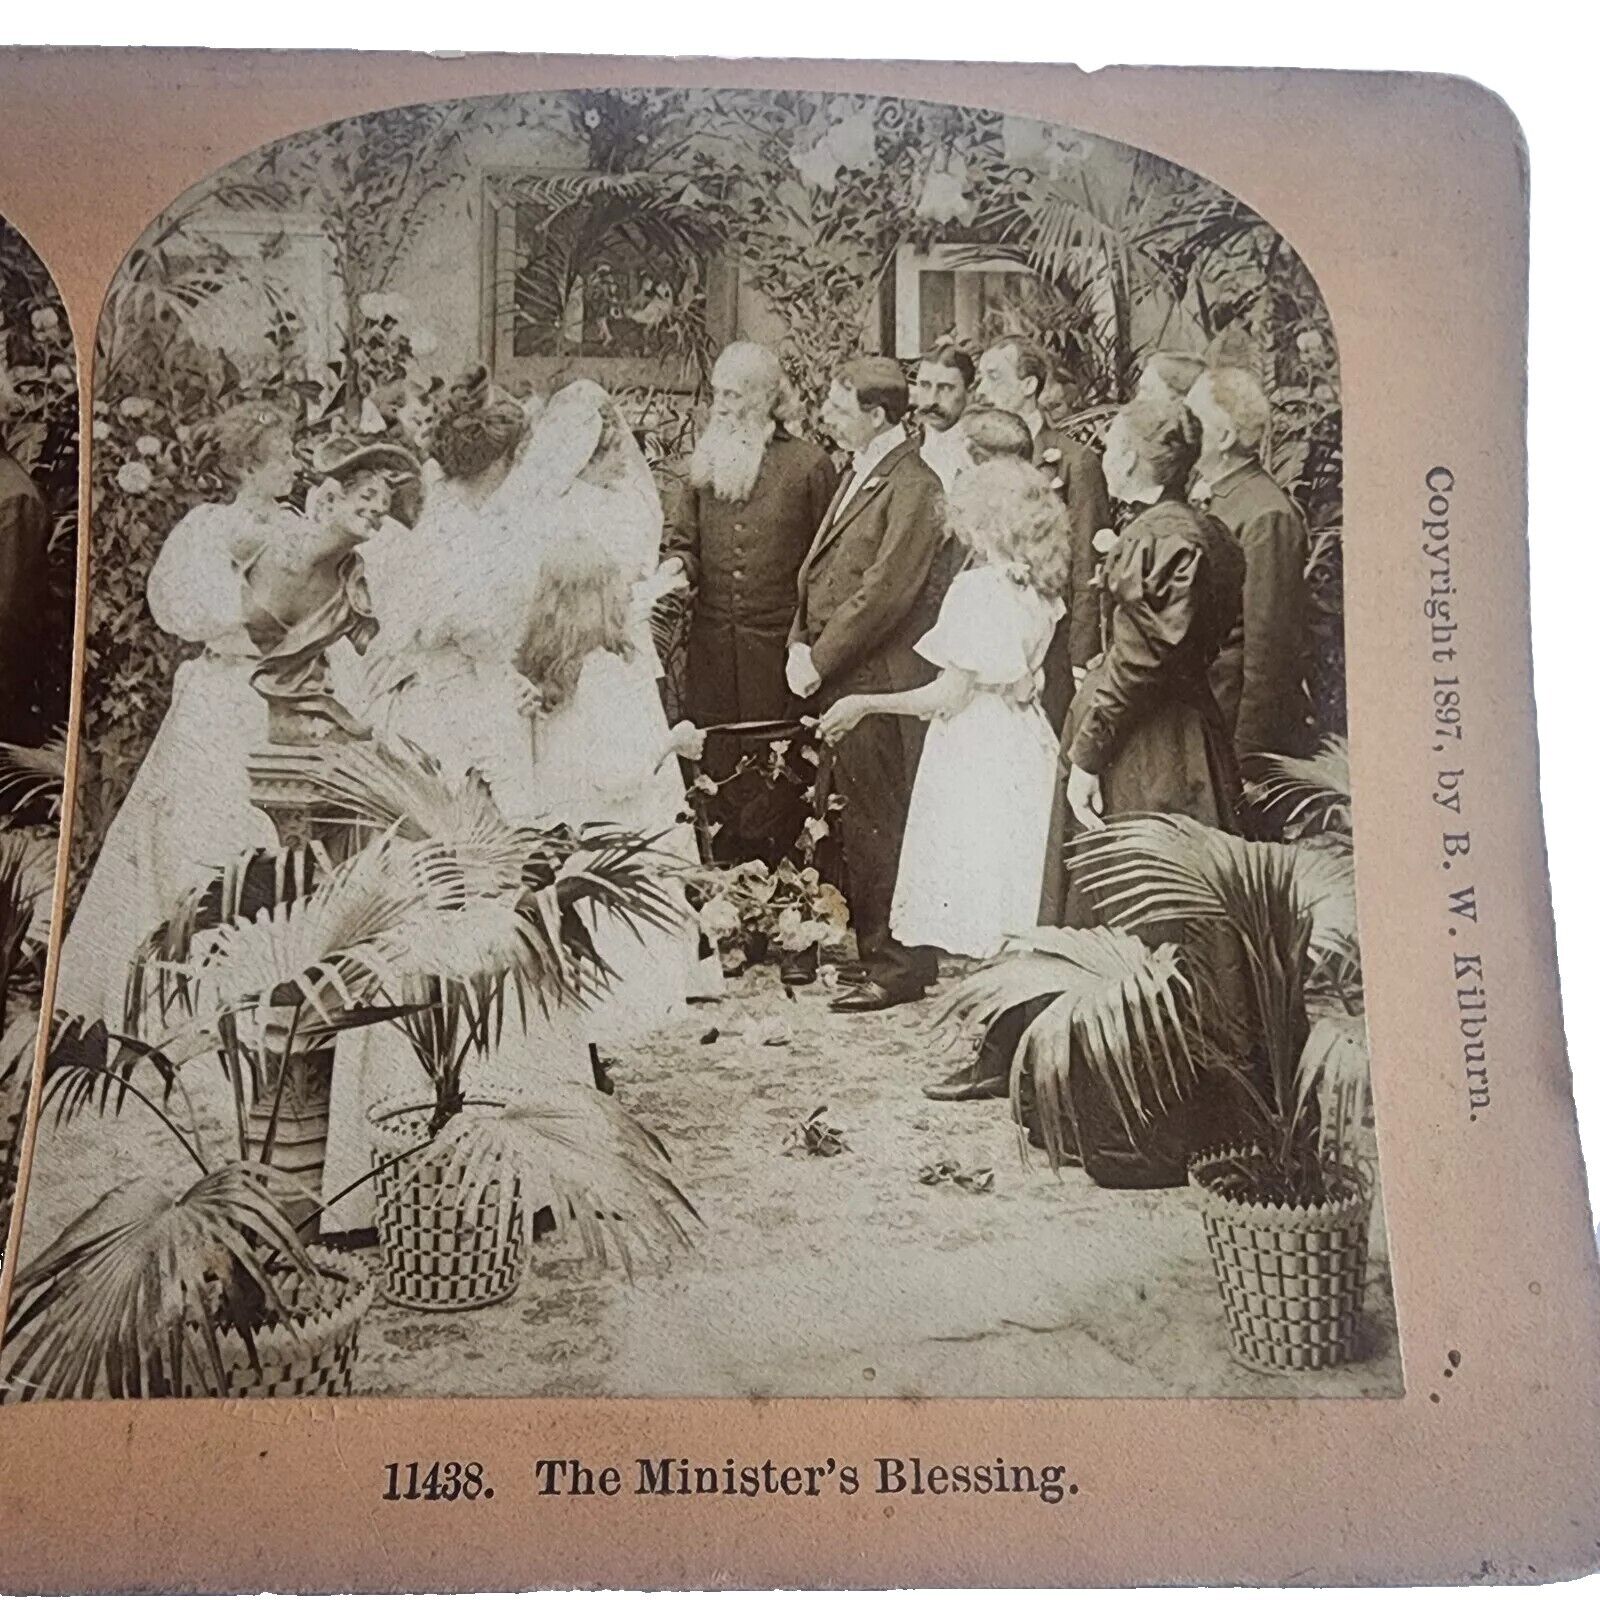 KILBURN SV Featuring the Ministers Blessing at a Wedding Circa 1897